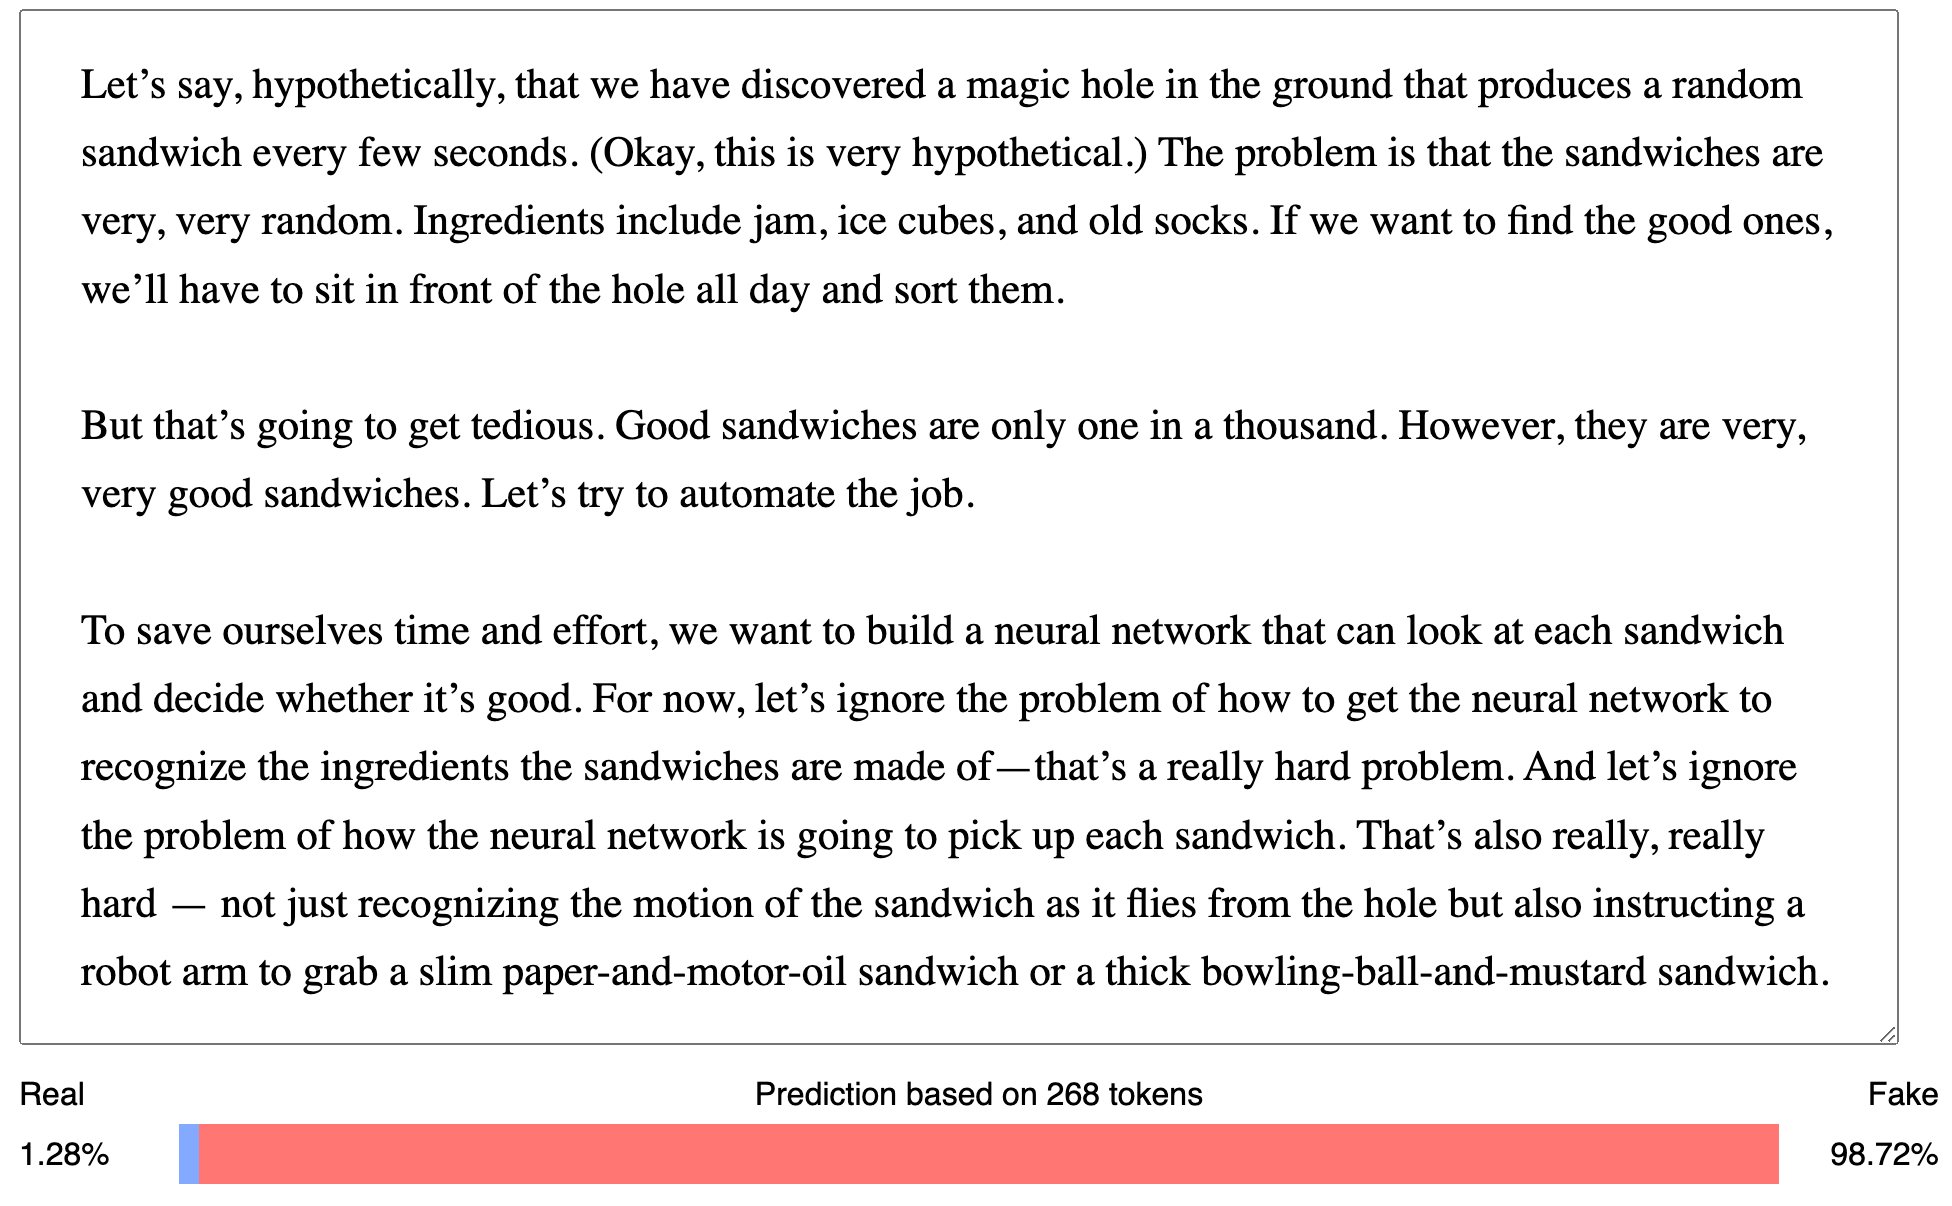 Rated as 98.72% fake base on 268 tokens. Input: Let’s say, hypothetically, that we have discovered a magic hole in the ground that produces a random sandwich every few seconds. (Okay, this is very hypothetical.) The problem is that the sandwiches are very, very random. Ingredients include jam, ice cubes, and old socks. If we want to find the good ones, we’ll have to sit in front of the hole all day and sort them.   But that’s going to get tedious. Good sandwiches are only one in a thousand. However, they are very, very good sandwiches. Let’s try to automate the job.  To save ourselves time and effort, we want to build a neural network that can look at each sandwich and decide whether it’s good. For now, let’s ignore the problem of how to get the neural network to recognize the ingredients the sandwiches are made of—that’s a really hard problem. And let’s ignore the problem of how the neural network is going to pick up each sandwich. That’s also really, really hard — not just recognizing the motion of the sandwich as it flies from the hole but also instructing a robot arm to grab a slim paper-and-motor-oil sandwich or a thick bowling-ball-and-mustard sandwich.